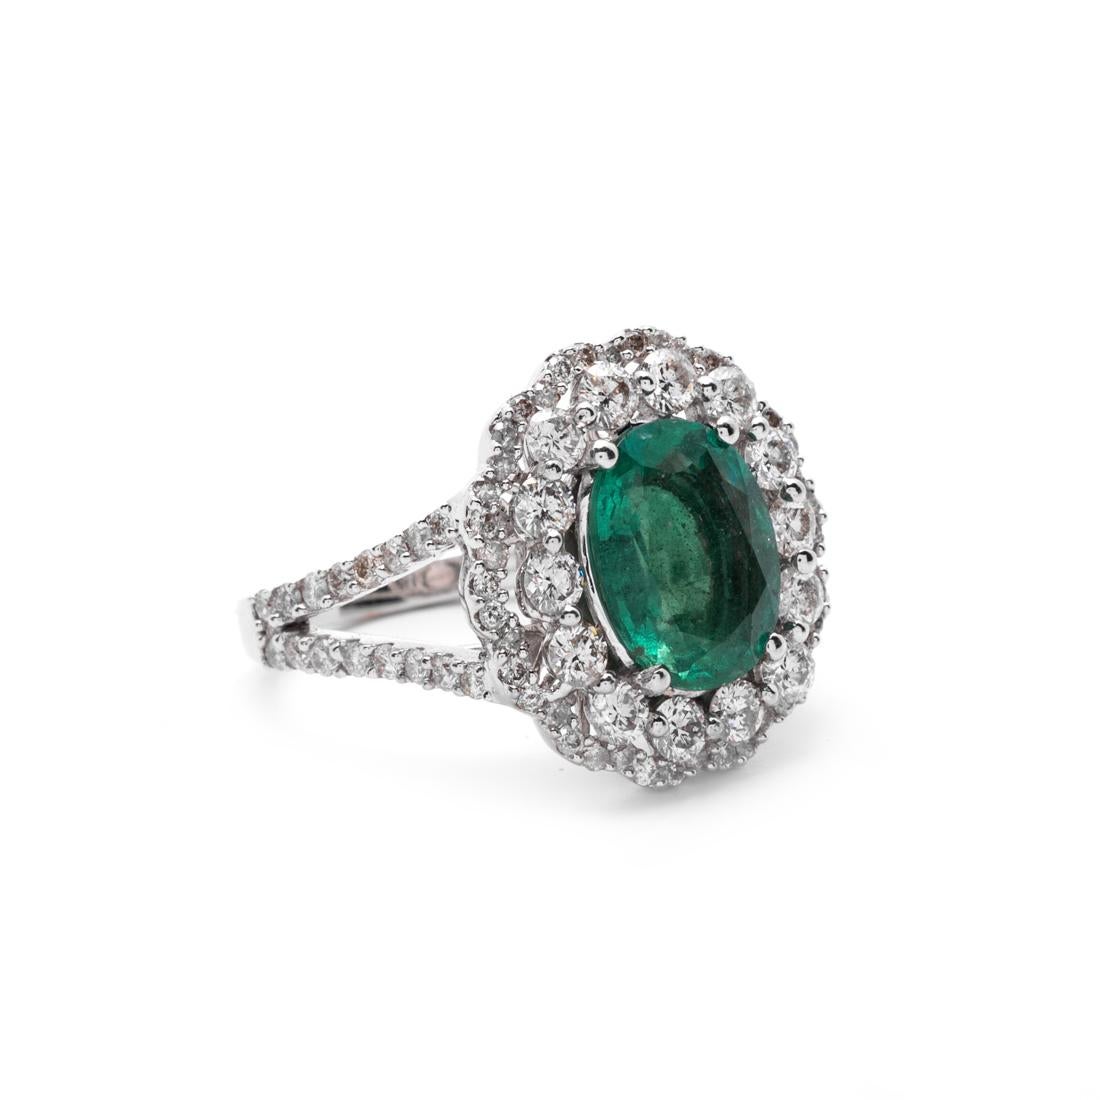 Emerald and Diamond Ring
Emerald weighing approx. 2.48 cts
Diamonds weighing approx 1.62 cts
mounted in 18kt gold
6.96 grams (gross)
Accompanied with AIG Appraisal 000717363018 
stating:
One 18Kt White Gold Emerald & Diamond Ring, featured emerald